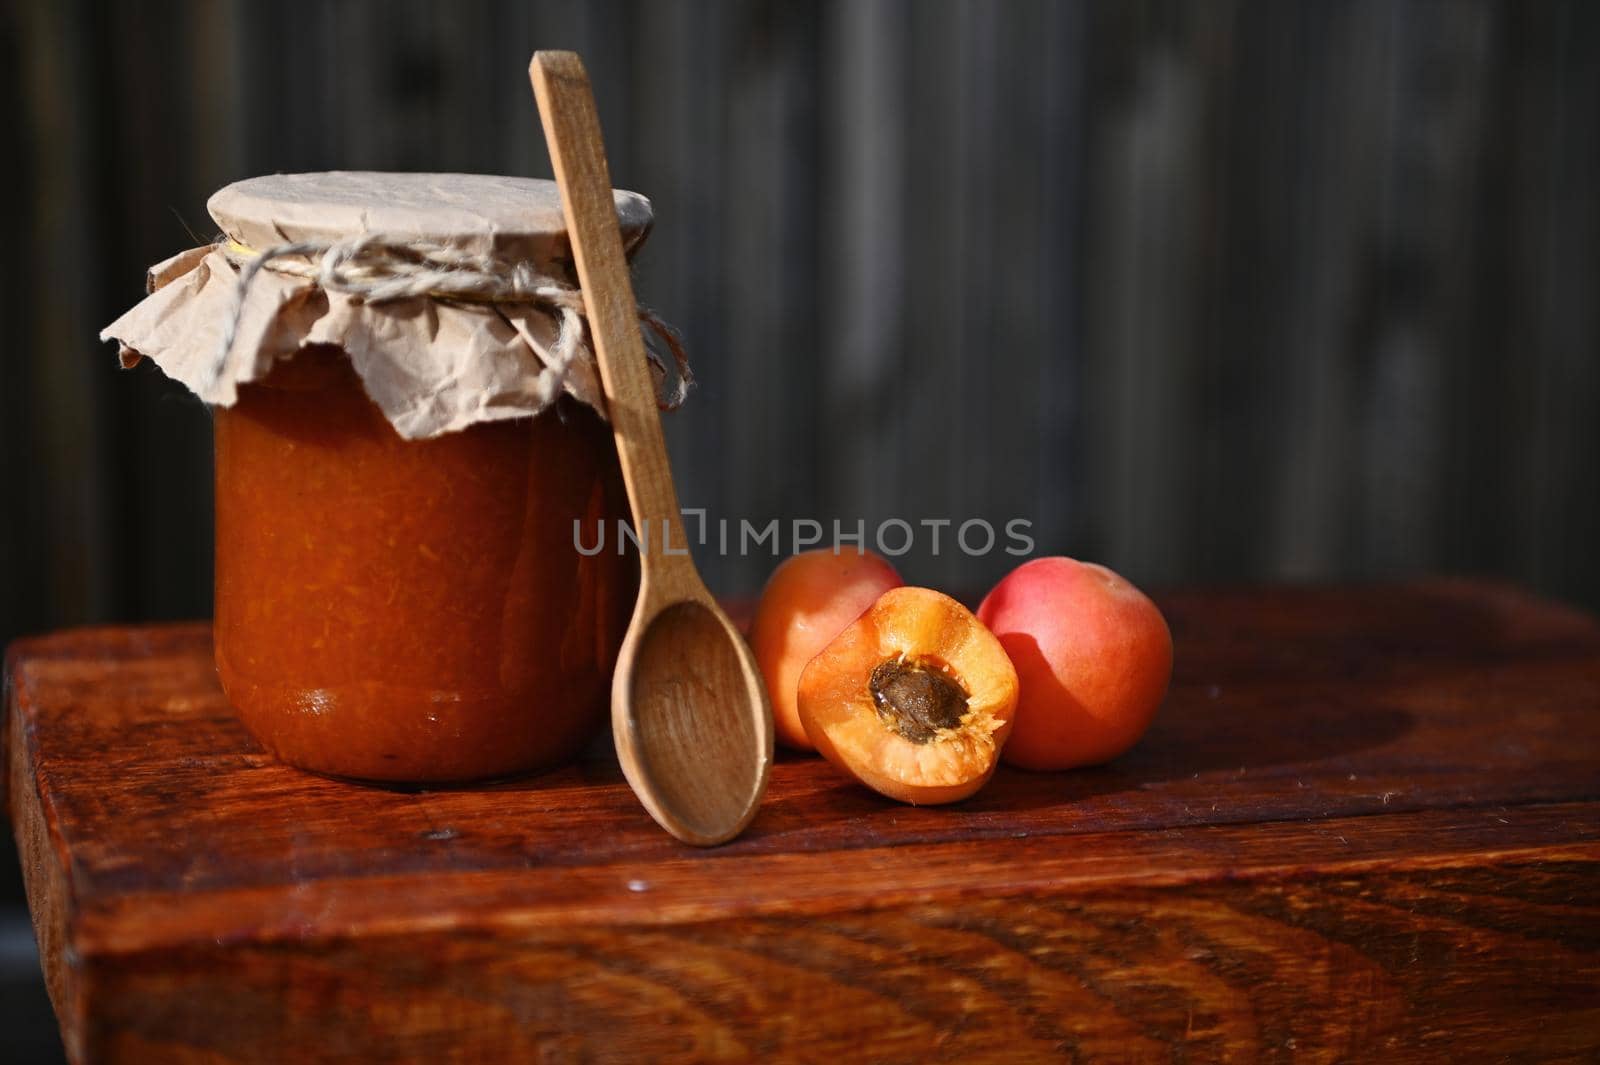 Still life. A glass jar of homemade jam, with craft paper on the lid tied with rope, halves of ripe ready-to-eat red sunny apricots and wooden spoon on rustic wood surface. Canning, sweet preserves.